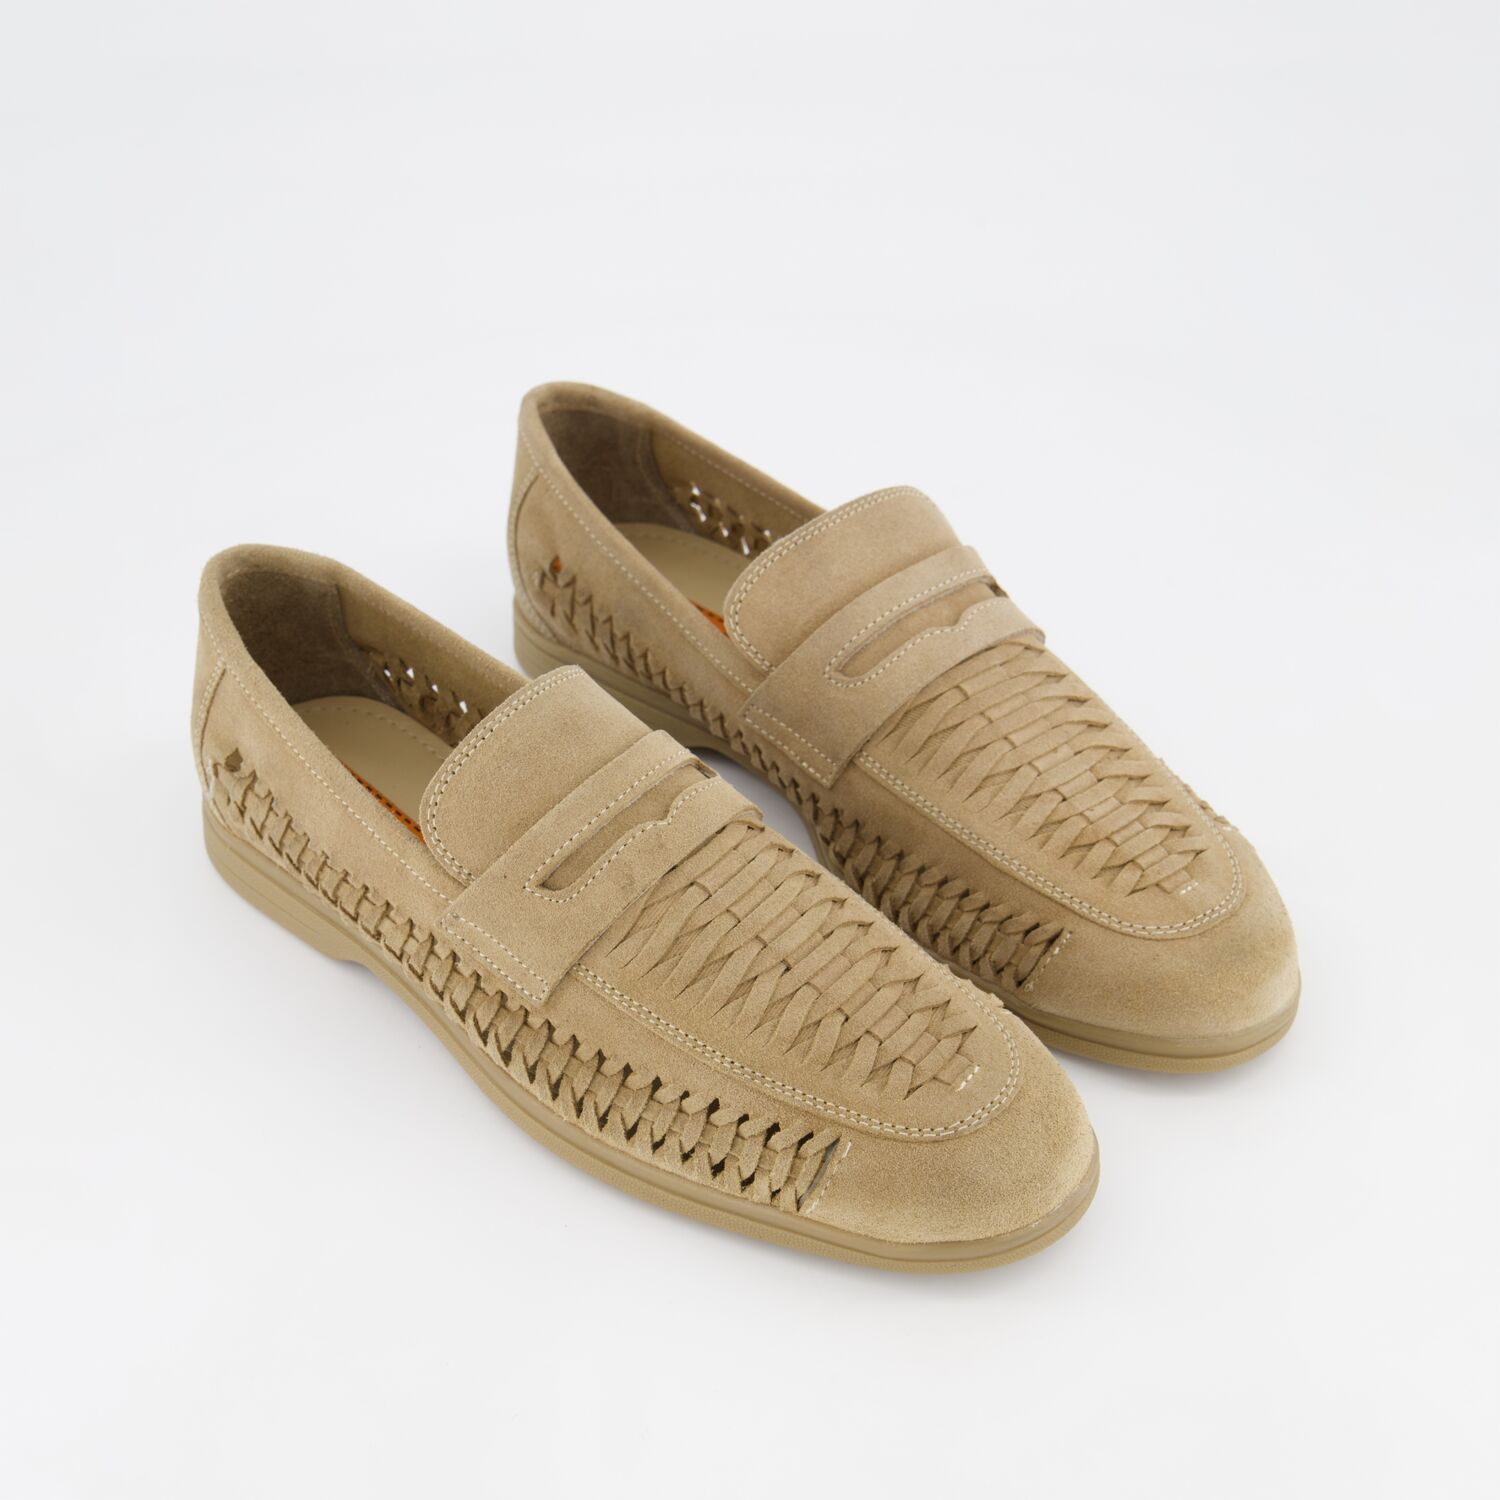 Taupe Suede Loafers - TK Maxx UK